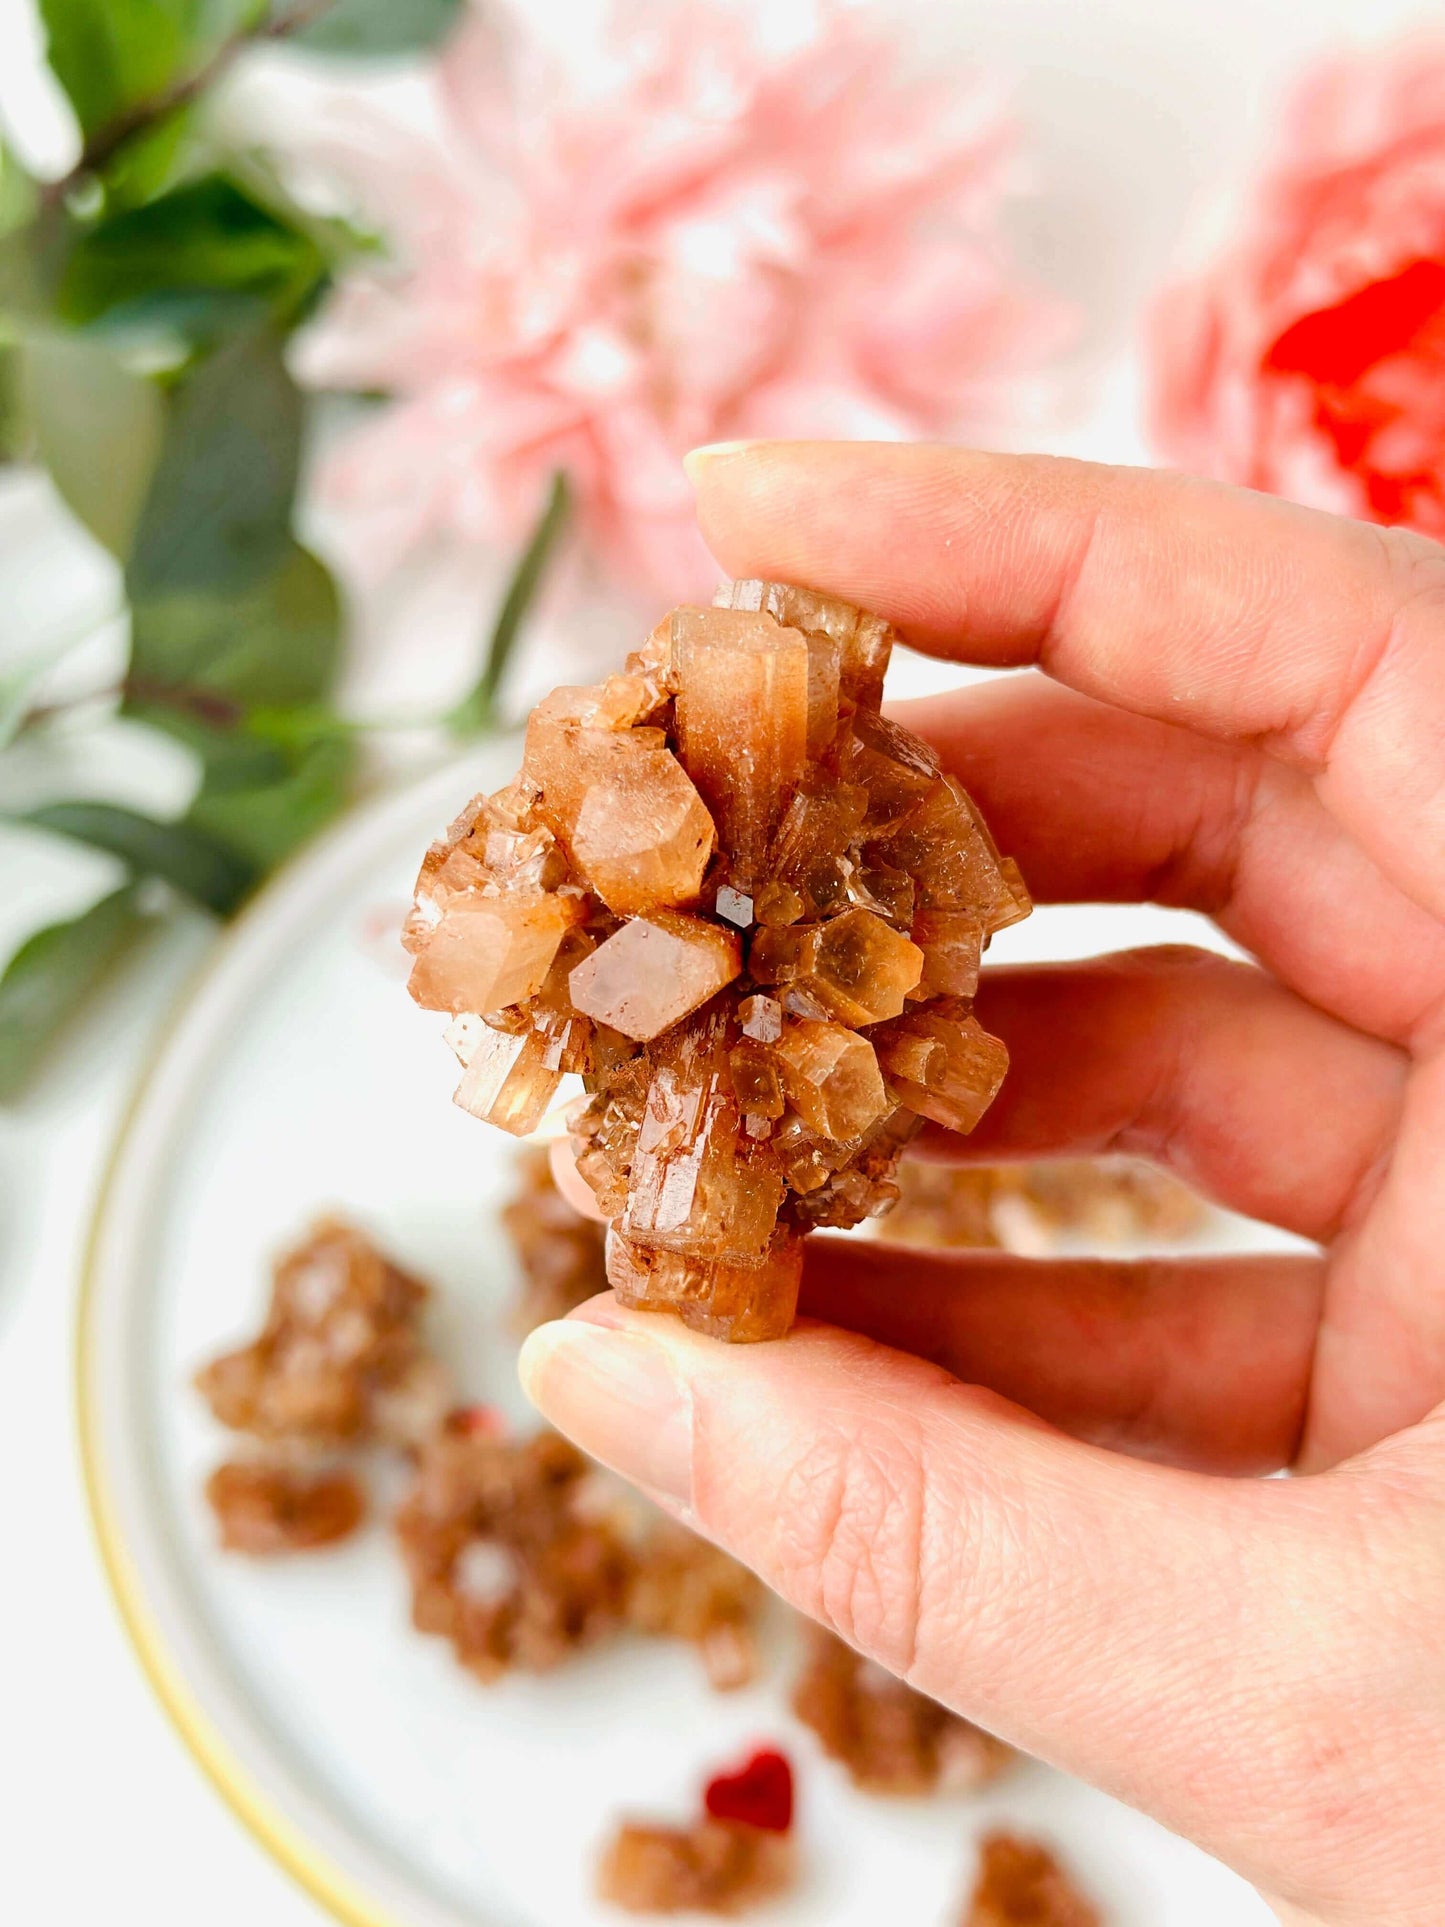 Aragonite cluster, Self love crystals, Raw crystals for confidence